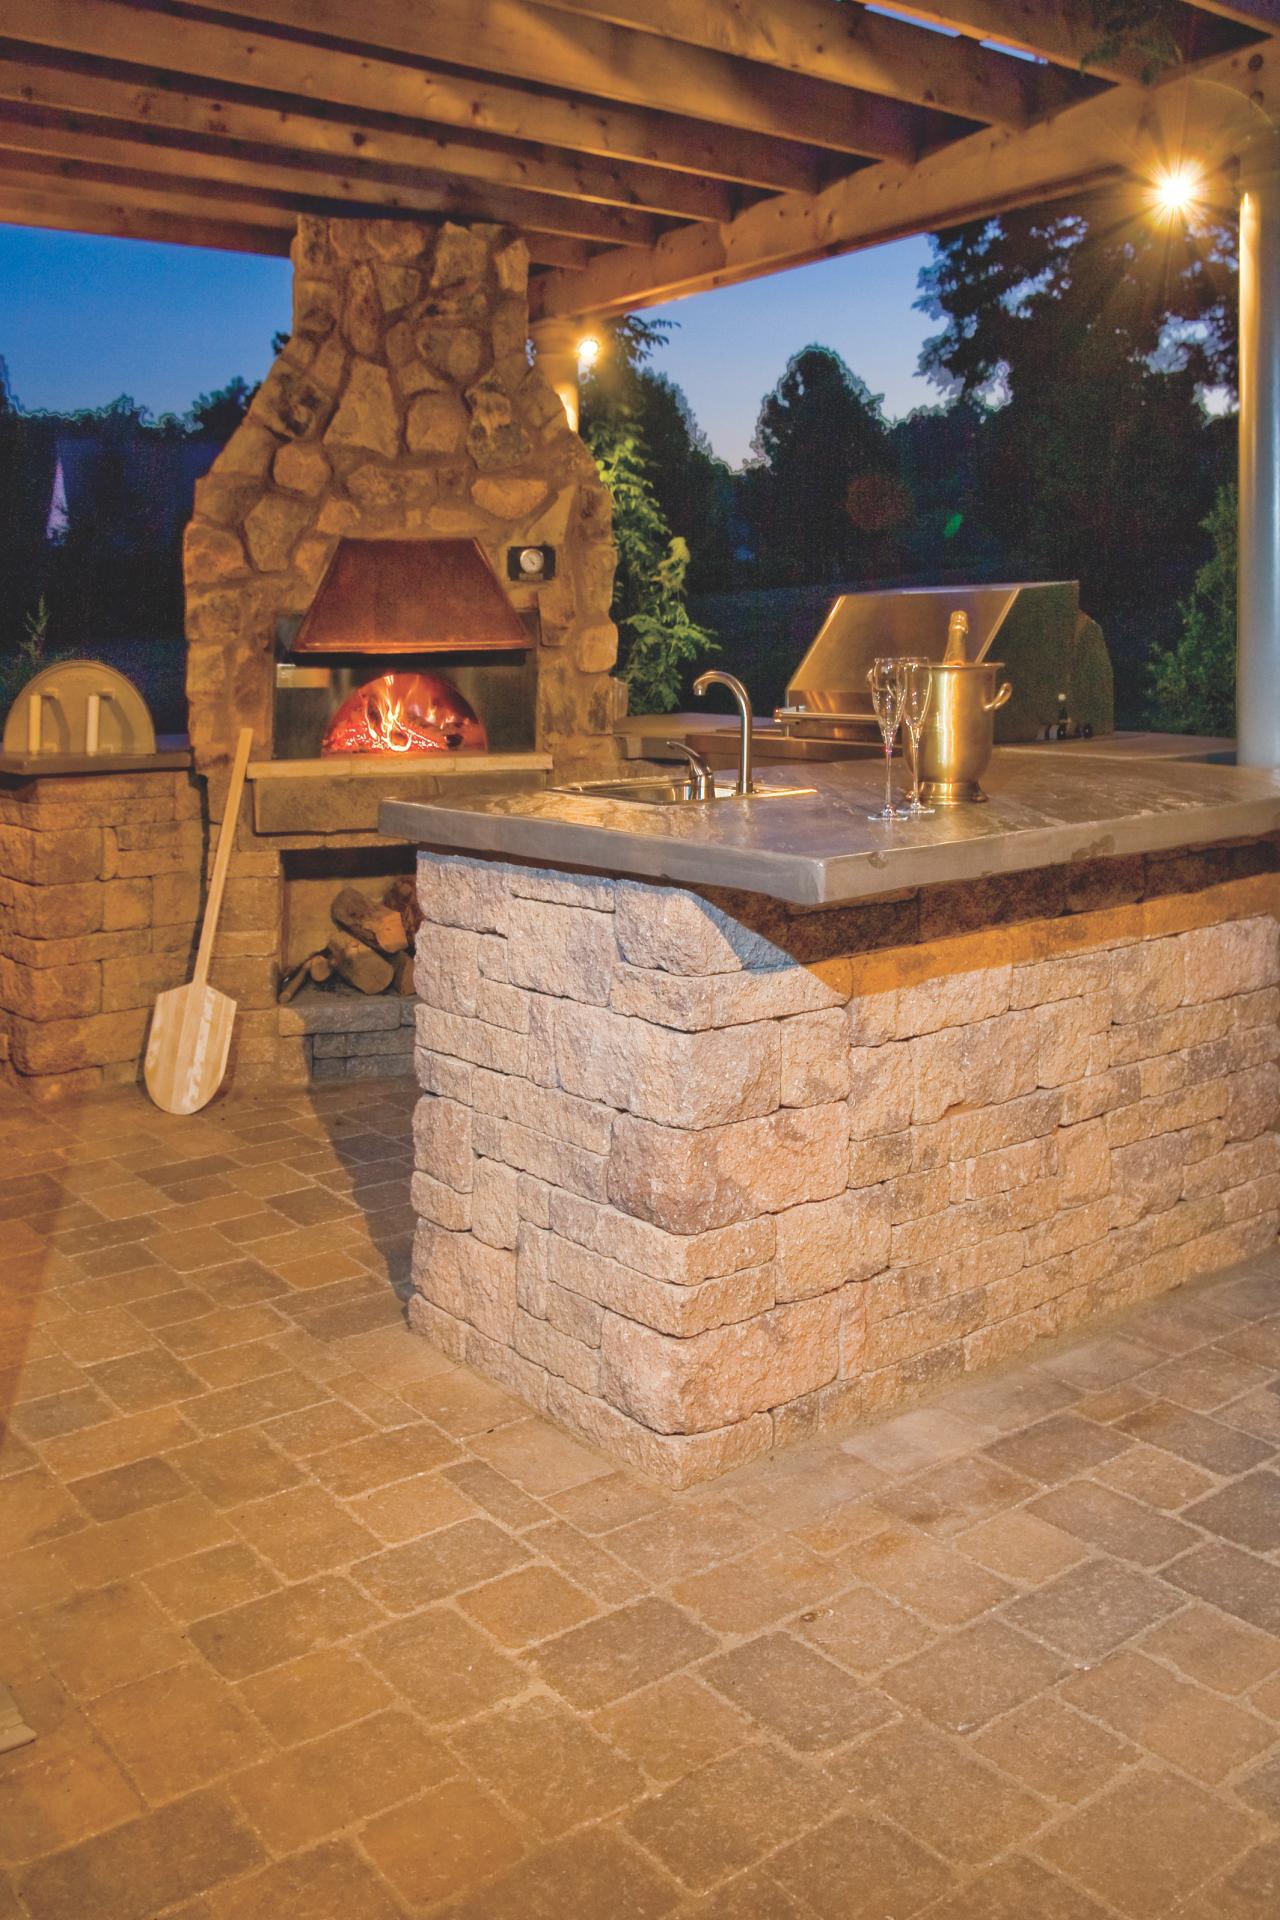 Outdoor Pizza Oven Fireplace Options, Outdoor Fireplace And Pizza Oven Ideas